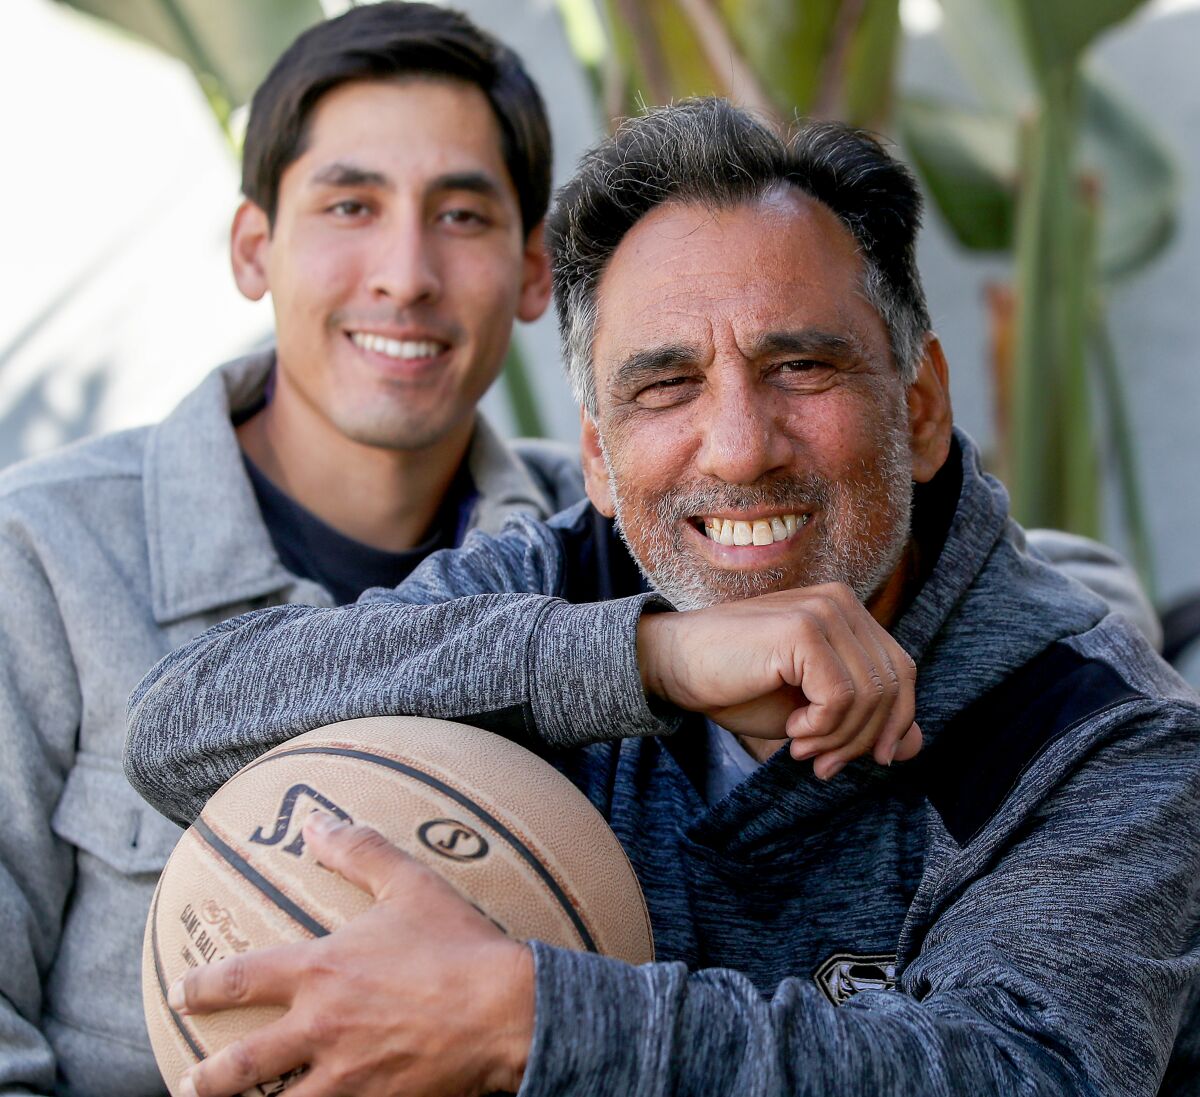 LOS ANGELES, CALIF. - MAR. 9, 2022. Portrait of father and sonmManuel, left, and Marcus Droz.